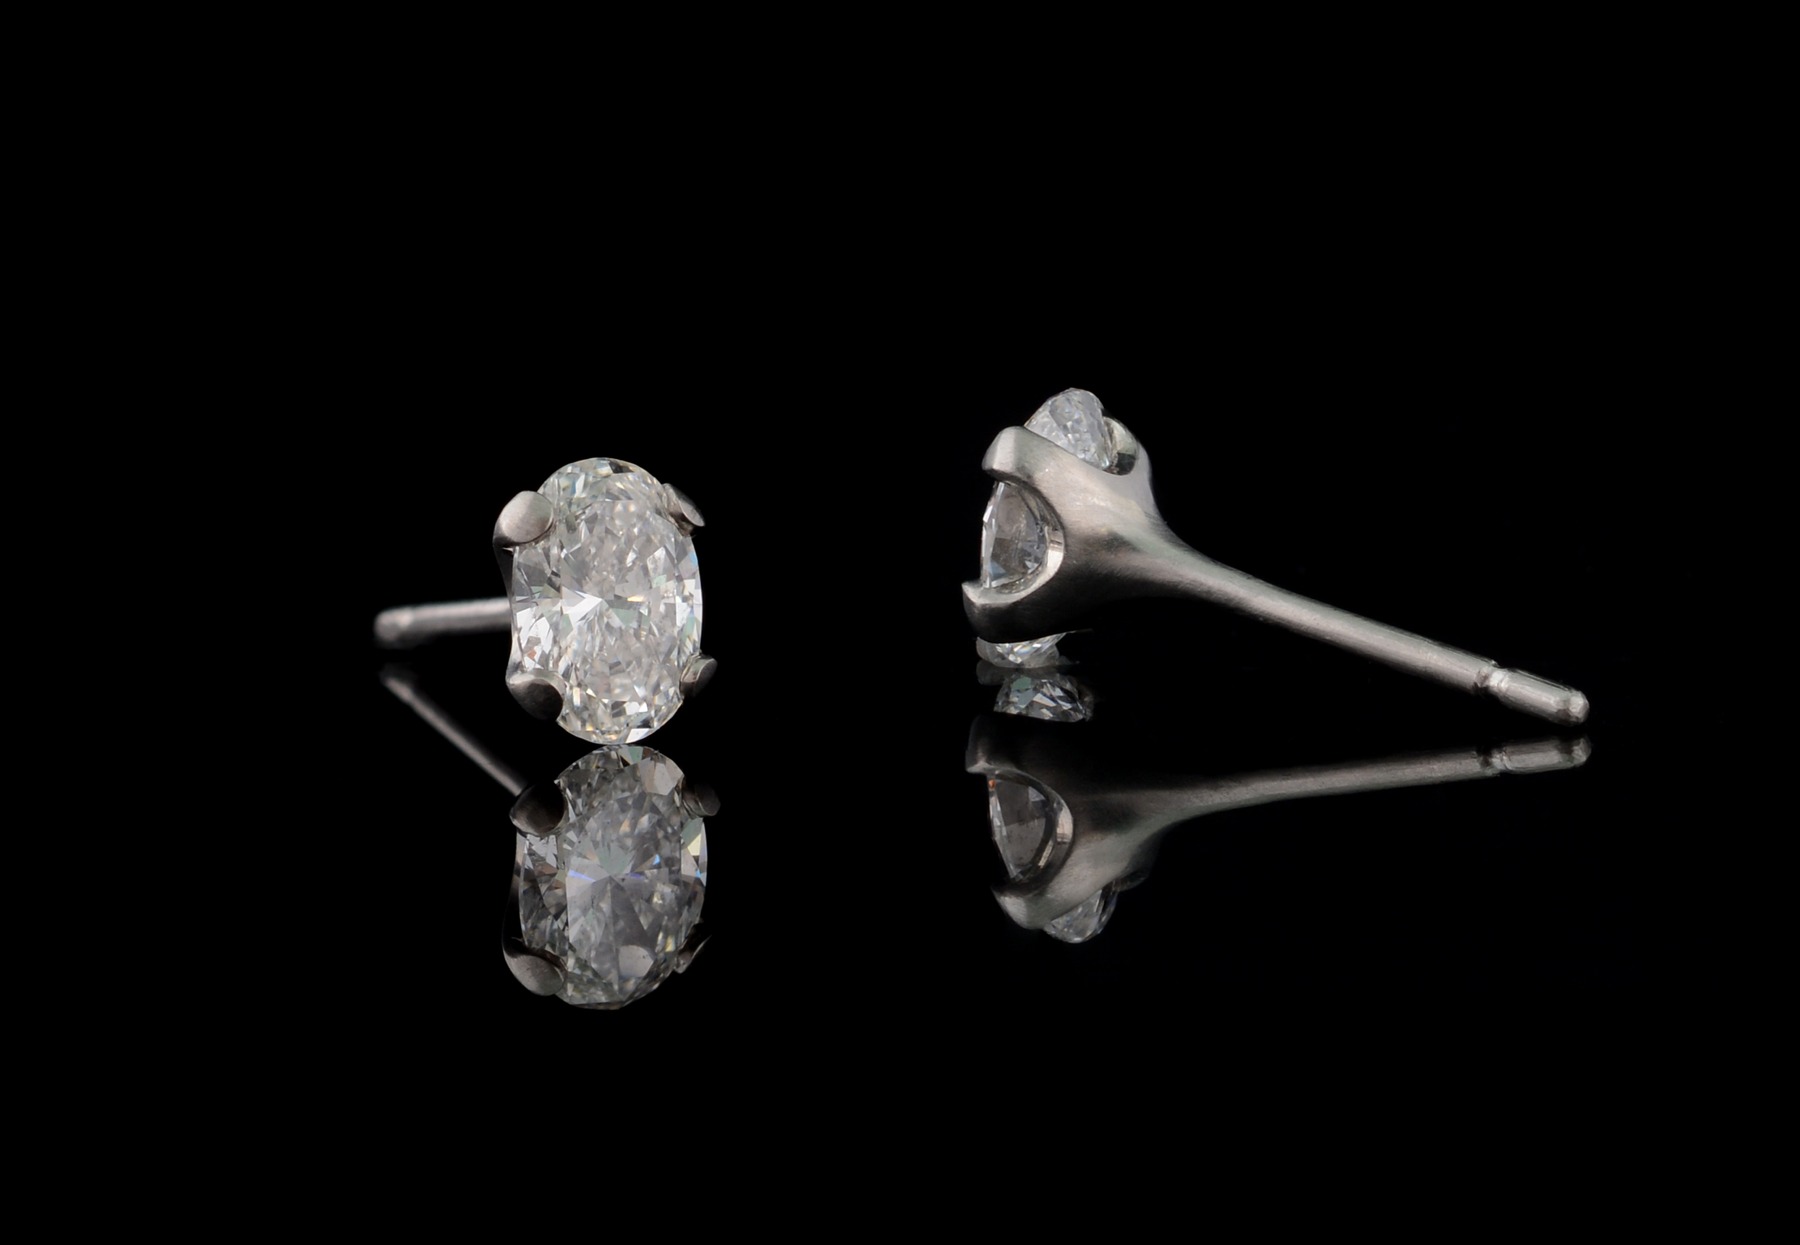 Platinum 4-claw stud earrings with oval white diamonds